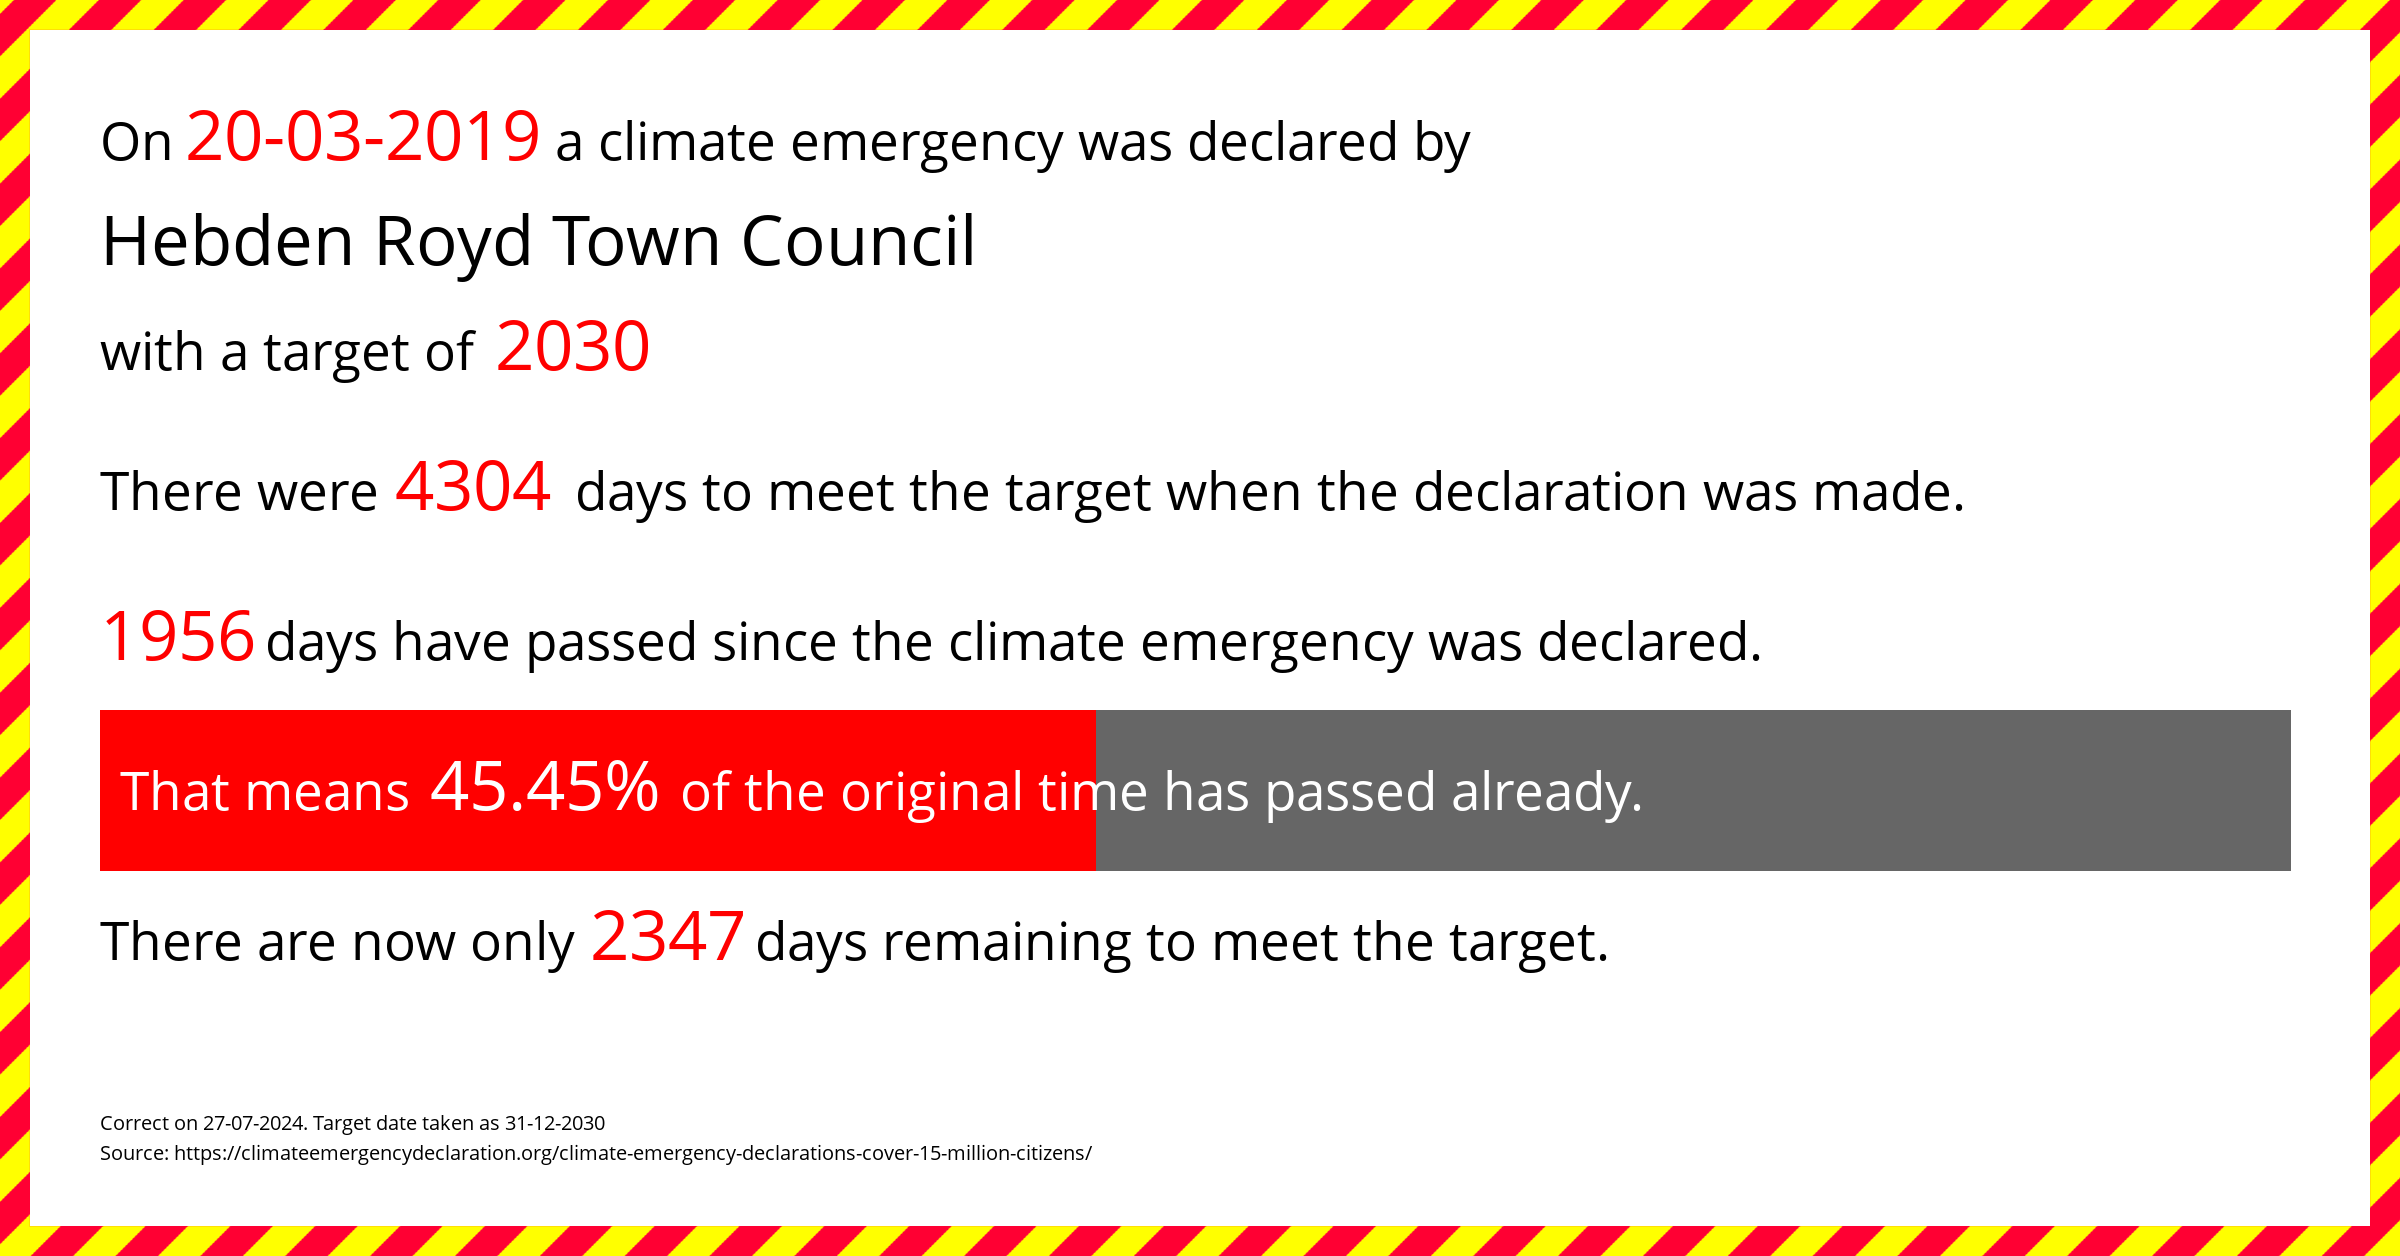 Hebden Royd Town Council declared a Climate emergency on Wednesday 20th March 2019, with a target of 2030.